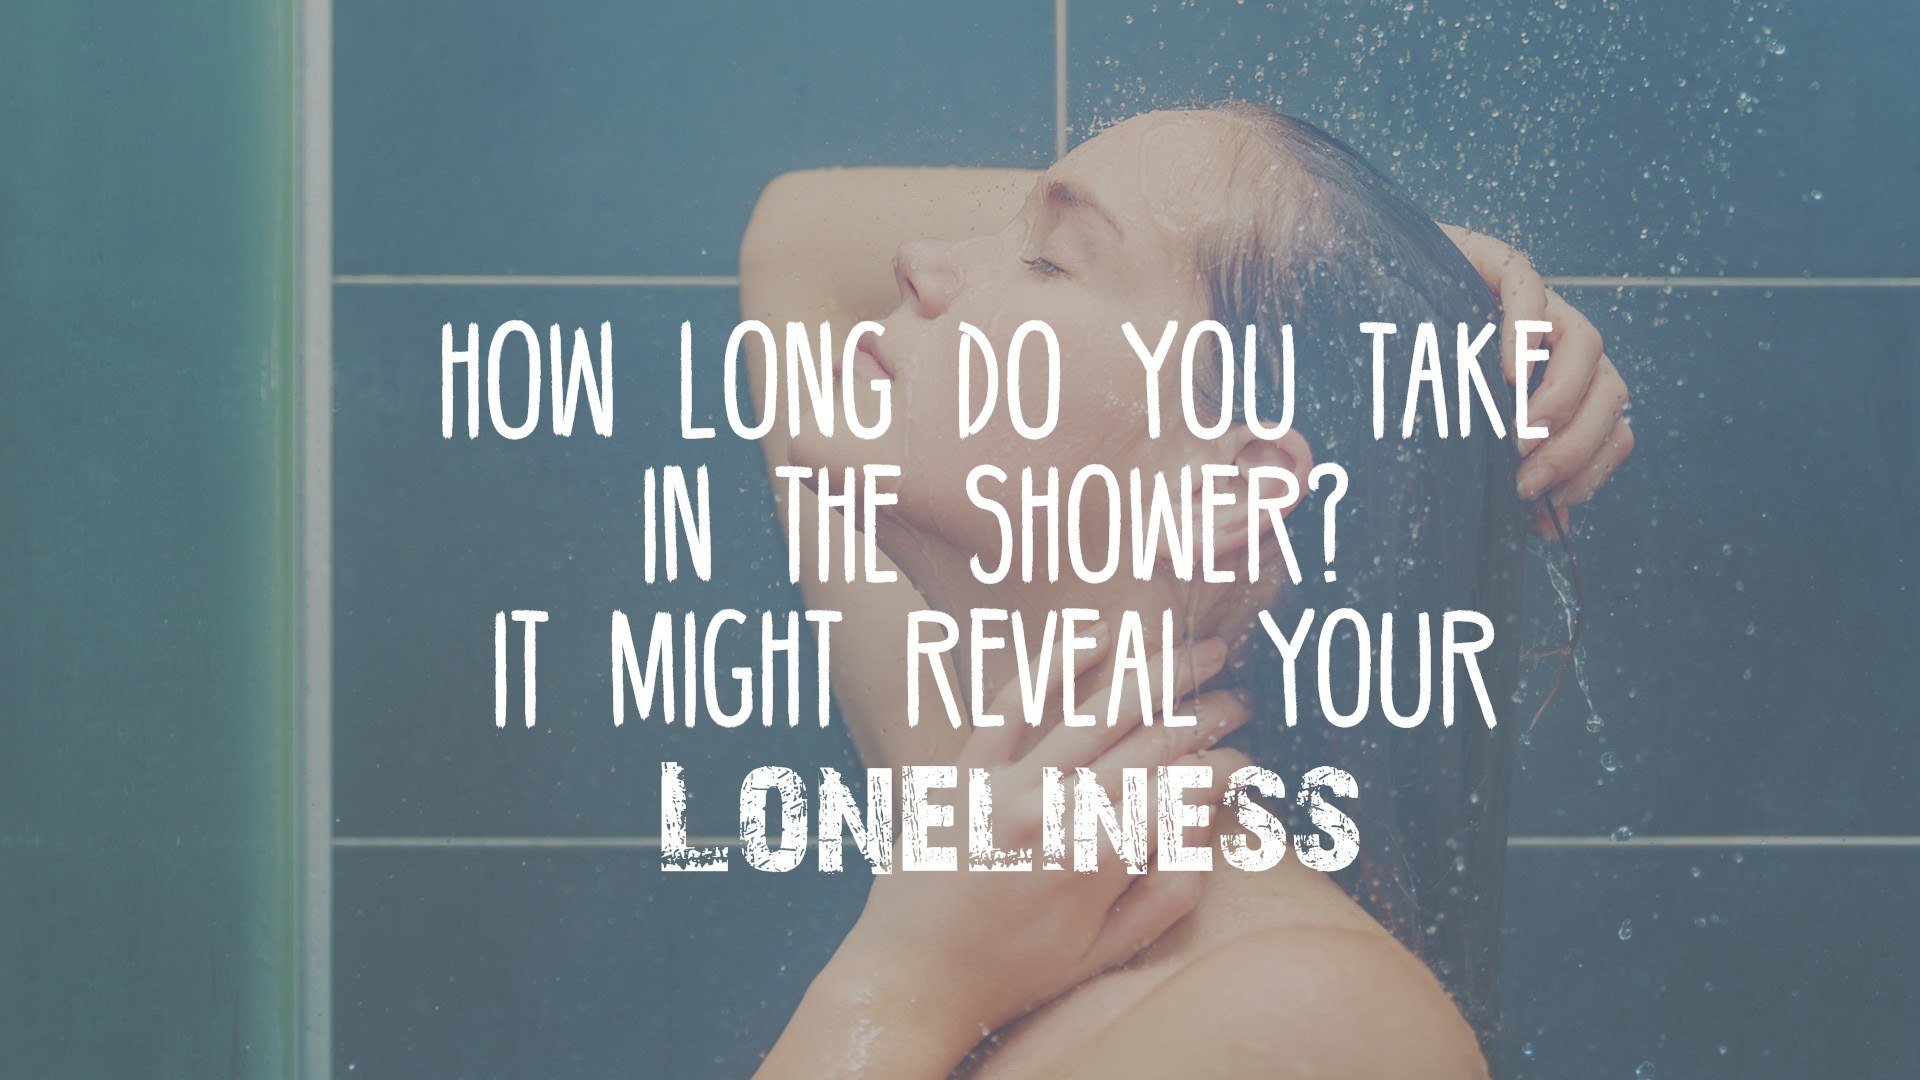 How Long Do You Take In The Shower? It Might Reveal Your Loneliness